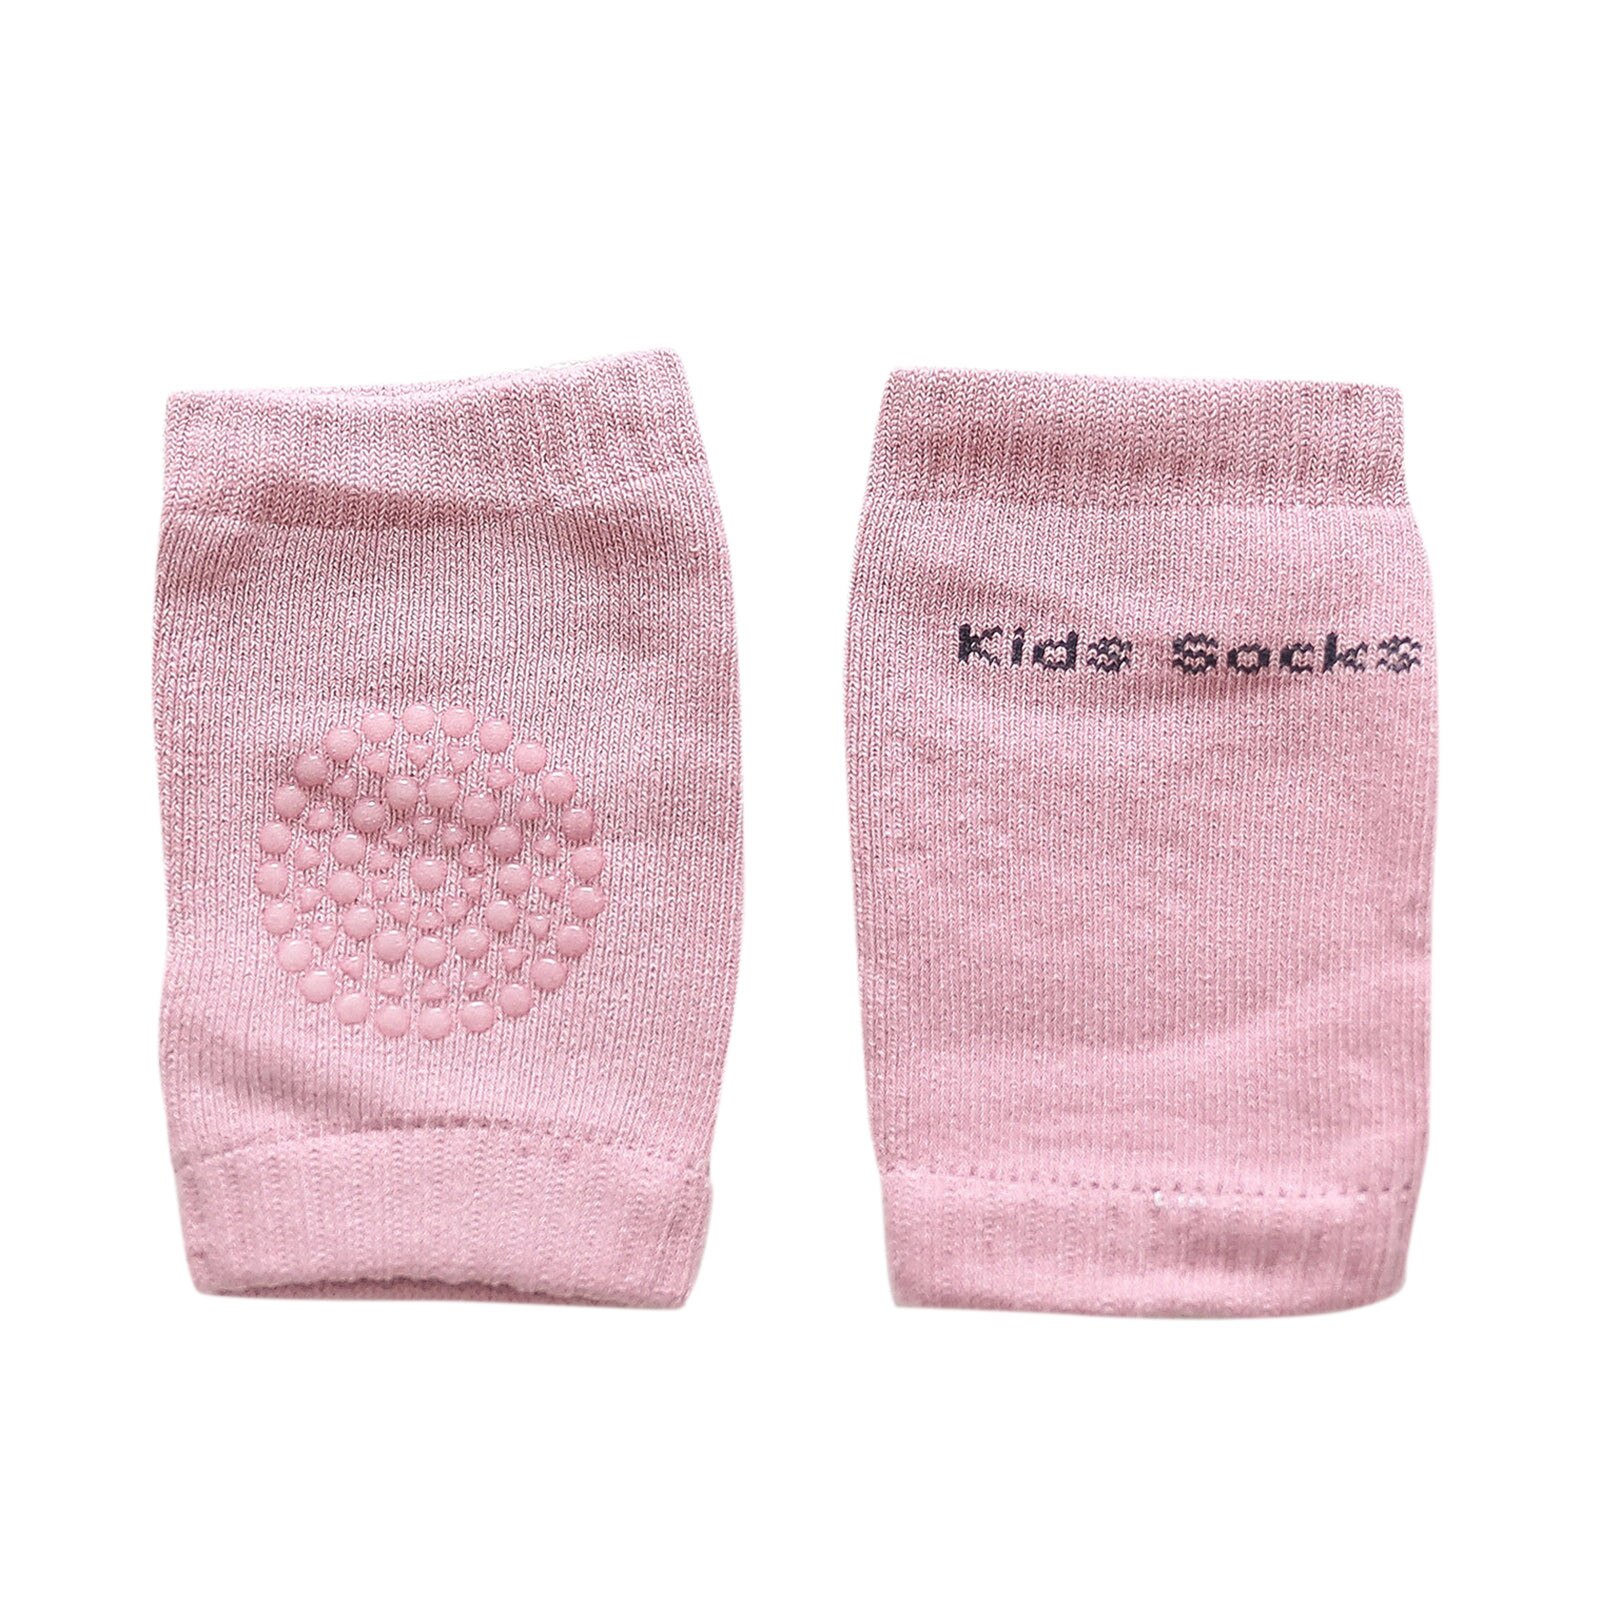 1 Pair Cozy Baby knee pad kids safety crawling elbow cushion infant toddlers baby leg warmer Knee Support Protector 2022: A